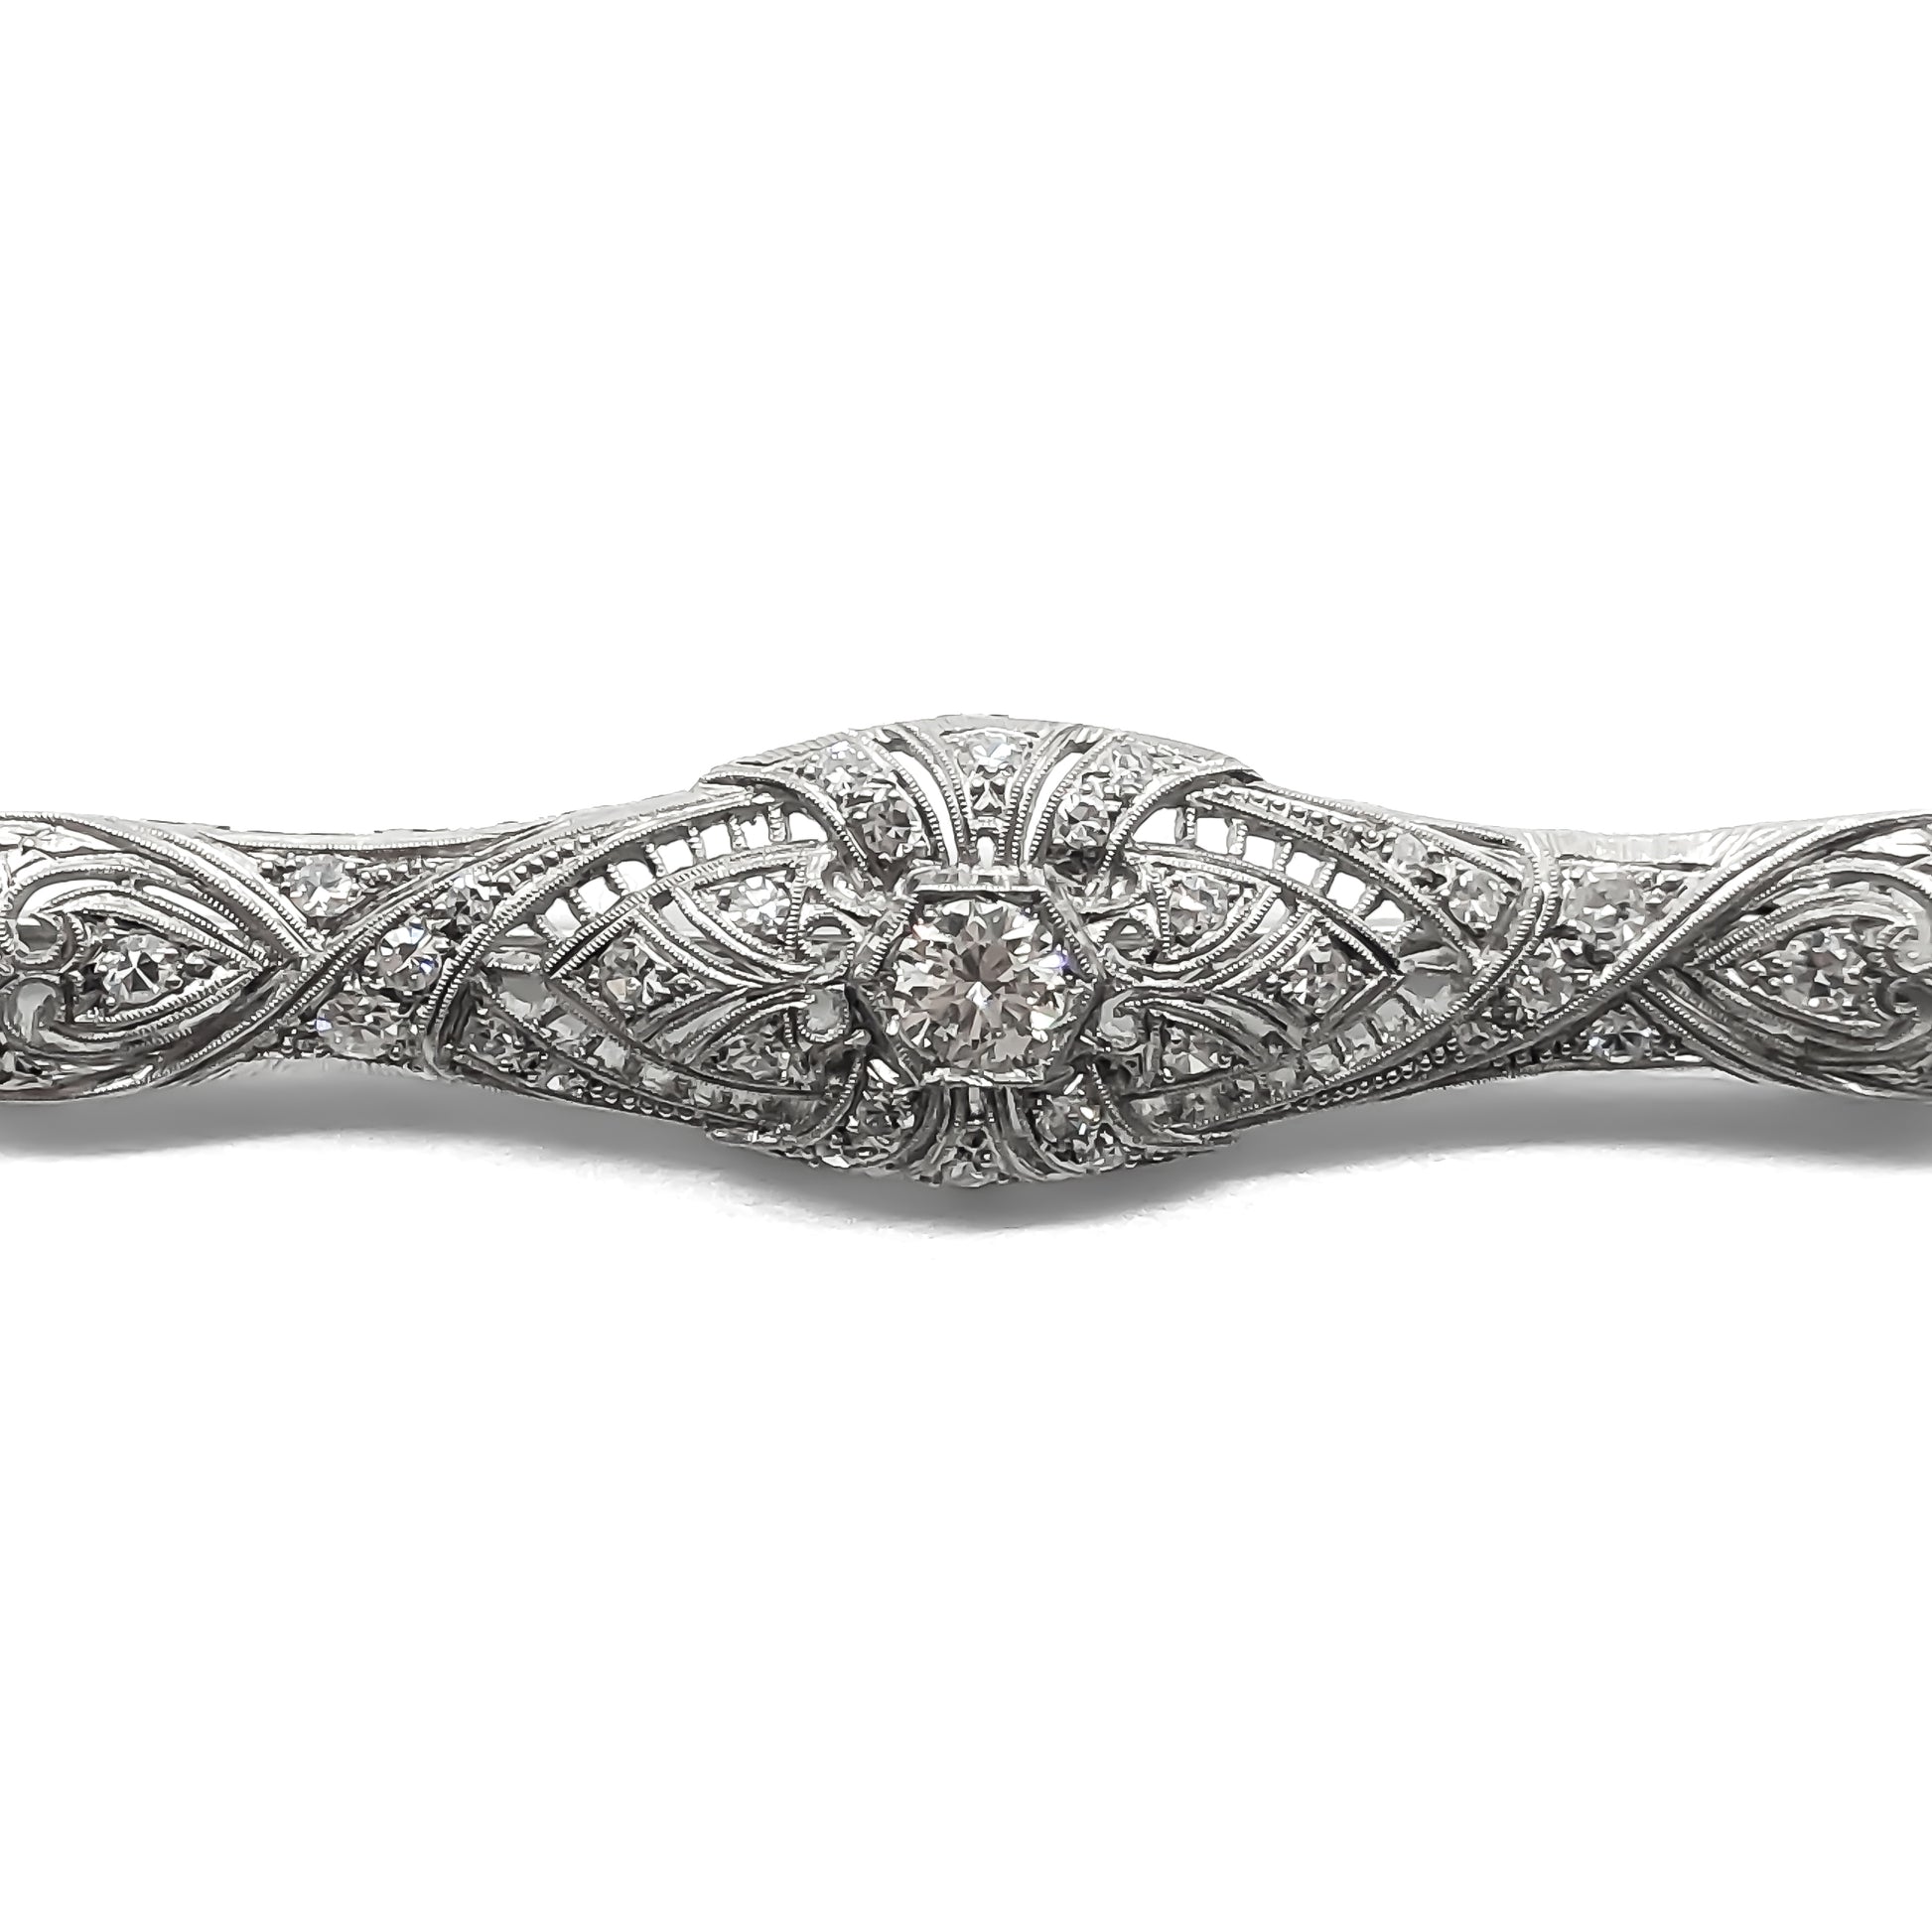 Stunning Art Deco platinum diamond brooch with a 0.40ct centre diamond and thirty smaller diamonds in an intricate filigree setting. Circa 1920s